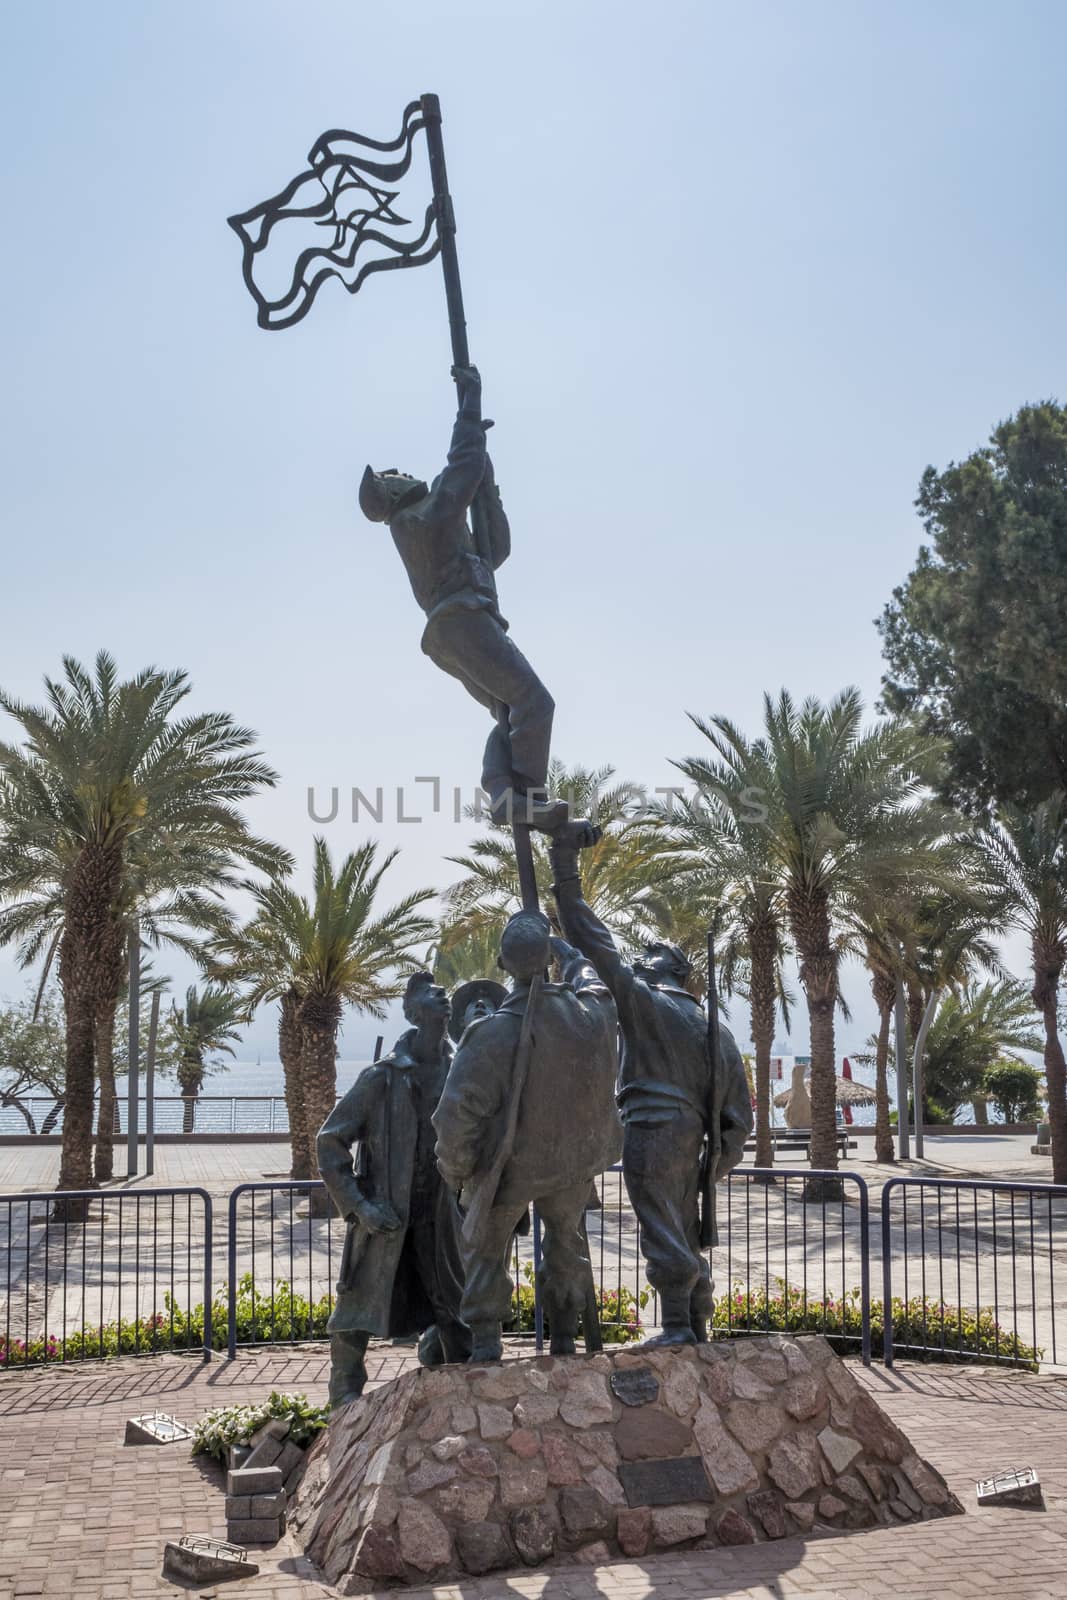 Eilat,21-march-2019:Israel Eilat sculpture Um Rash Rash by M Kapri view with palm trees sea and mountains in bkgd